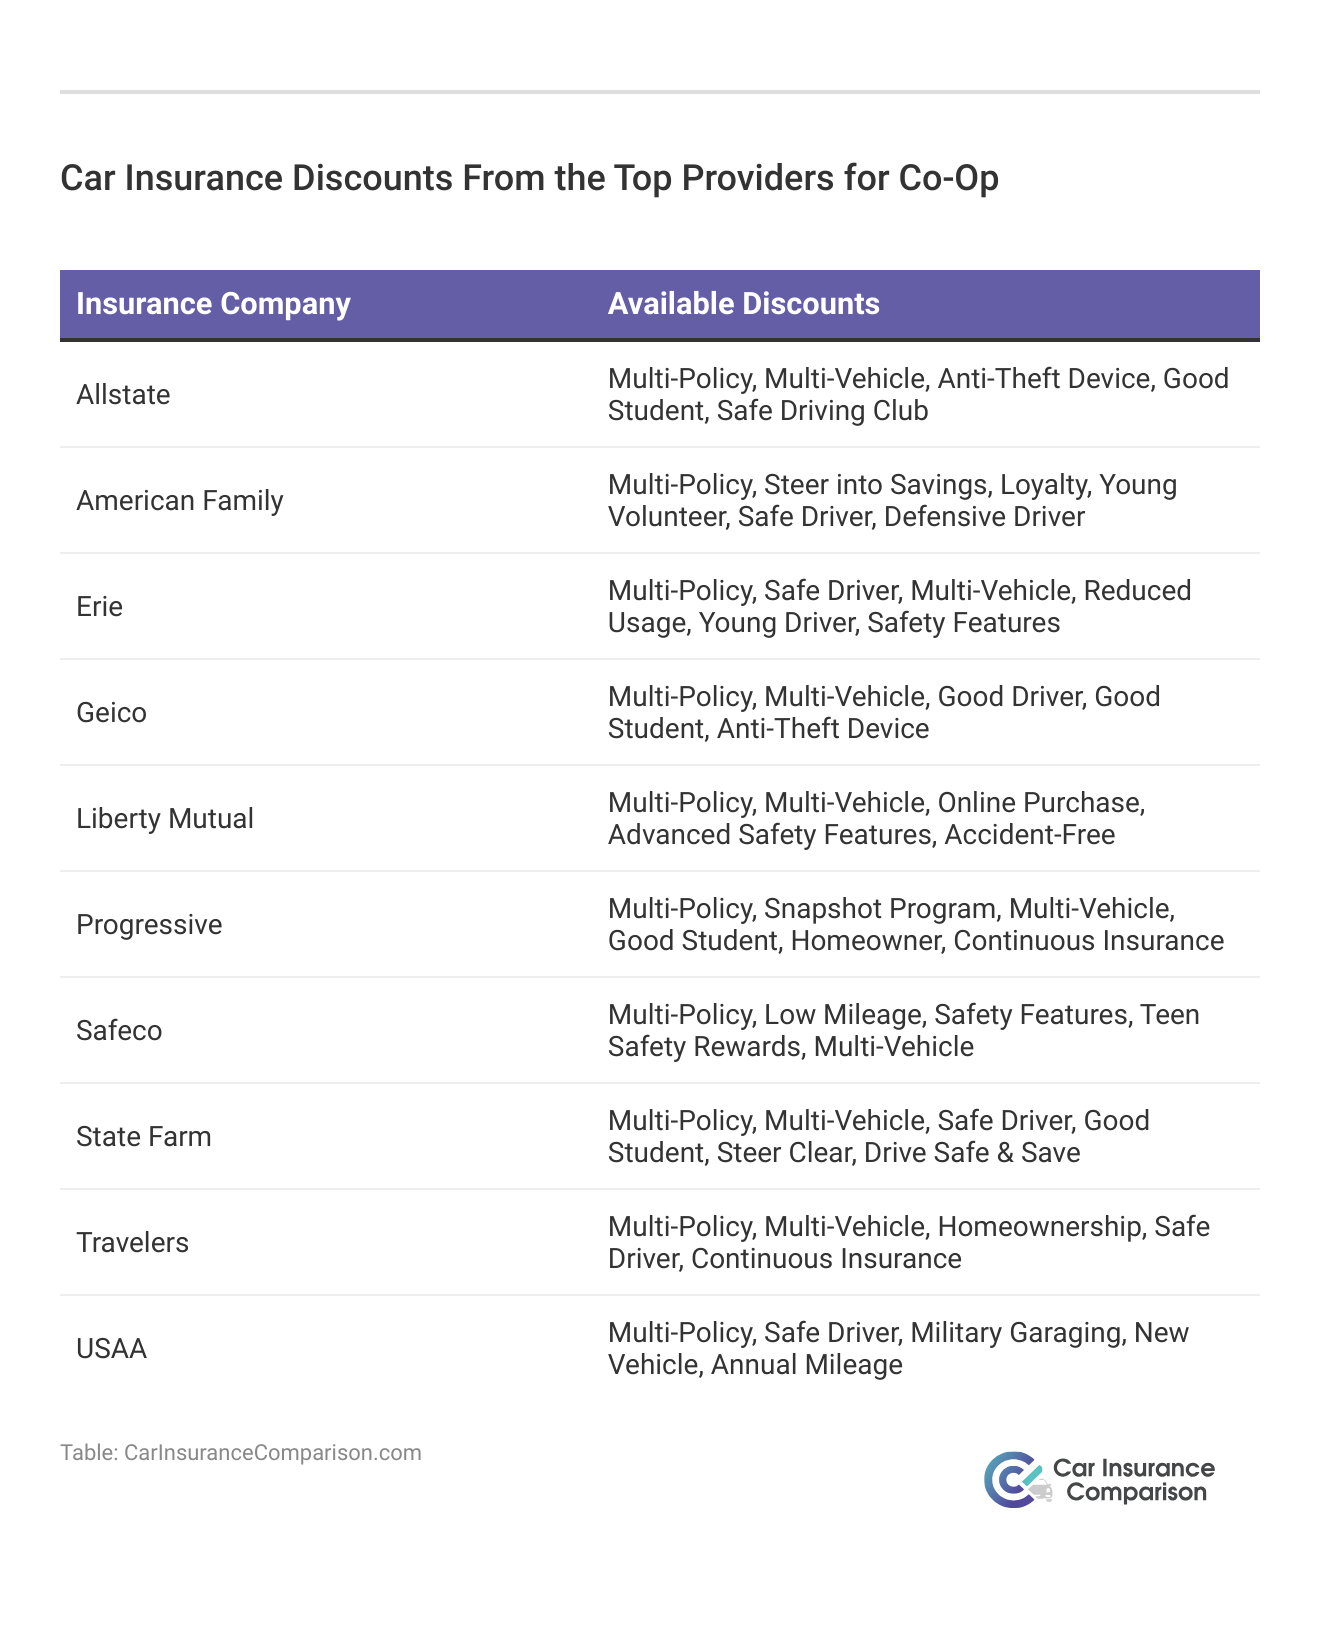 <h3>Car Insurance Discounts From the Top Providers for Co-Op</h3>